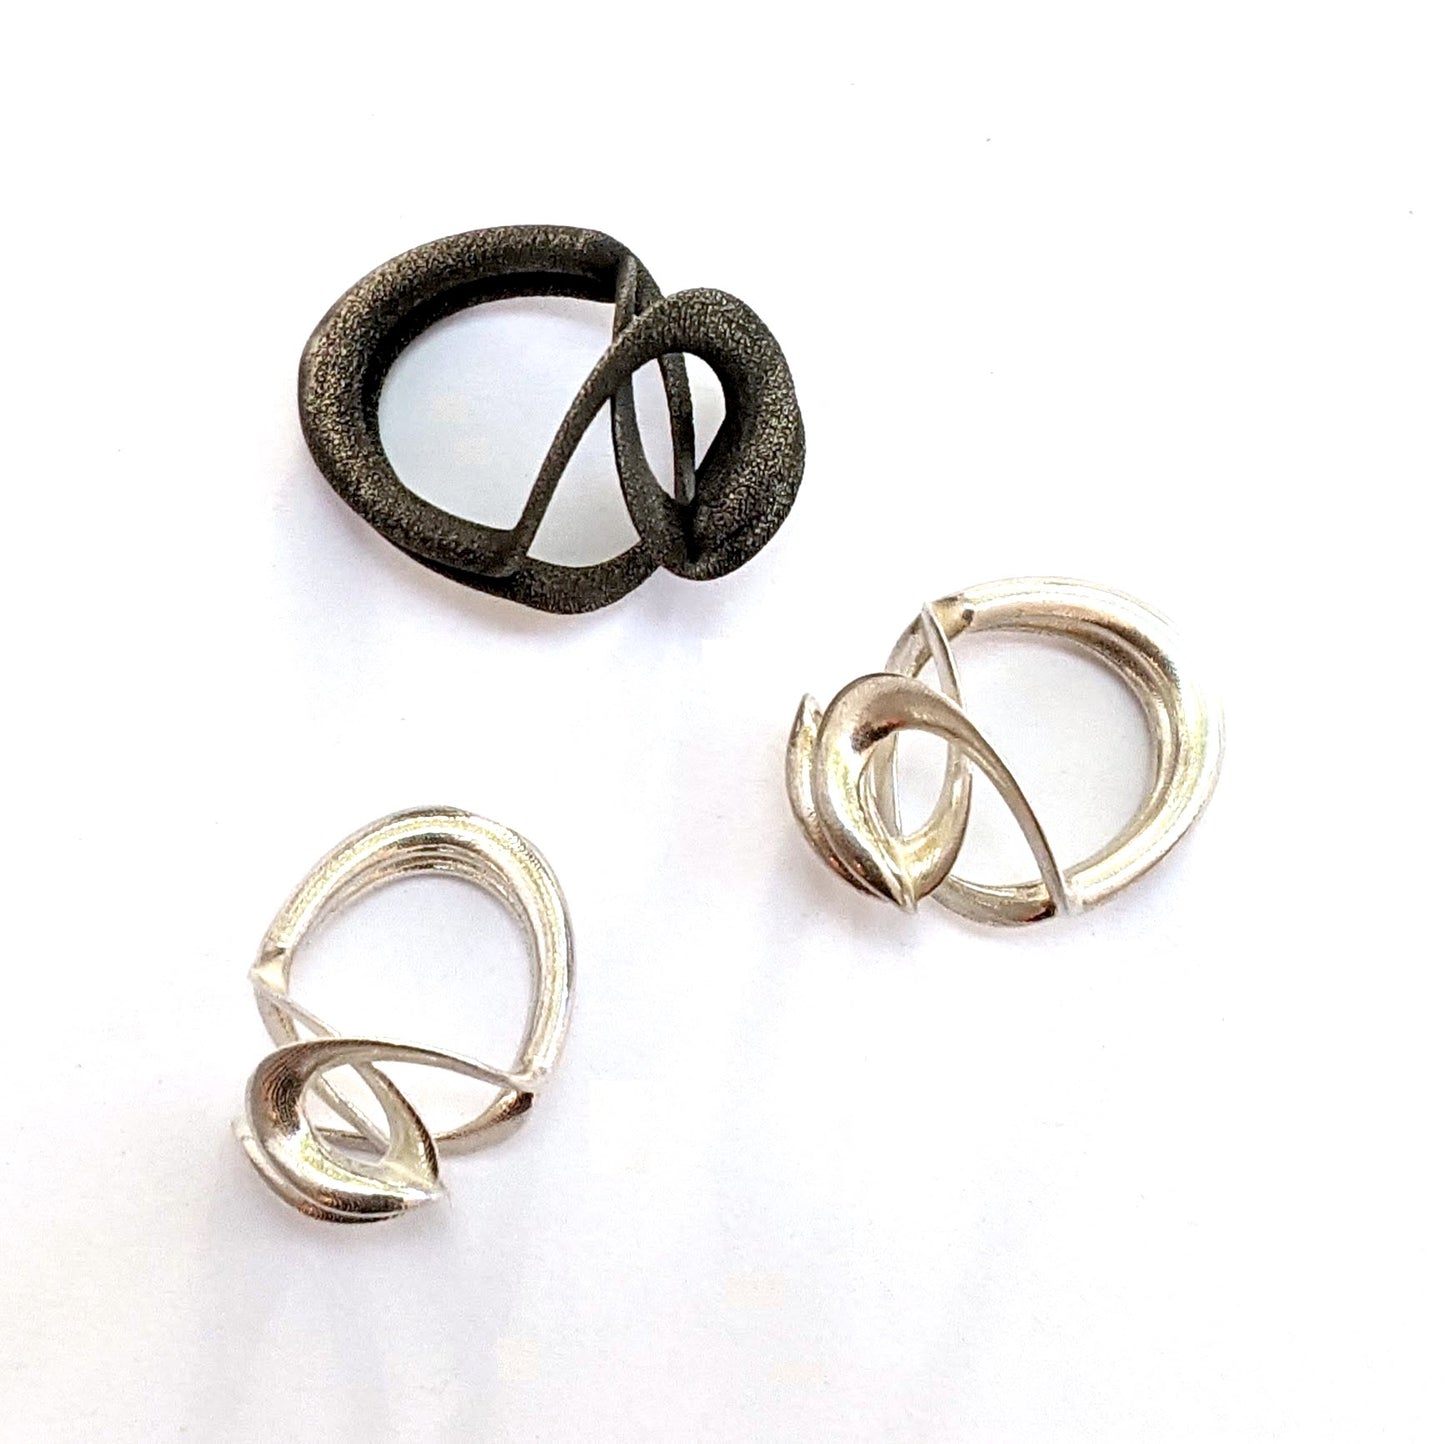 Ring Sterling Silver Pirouette Oxidised Large